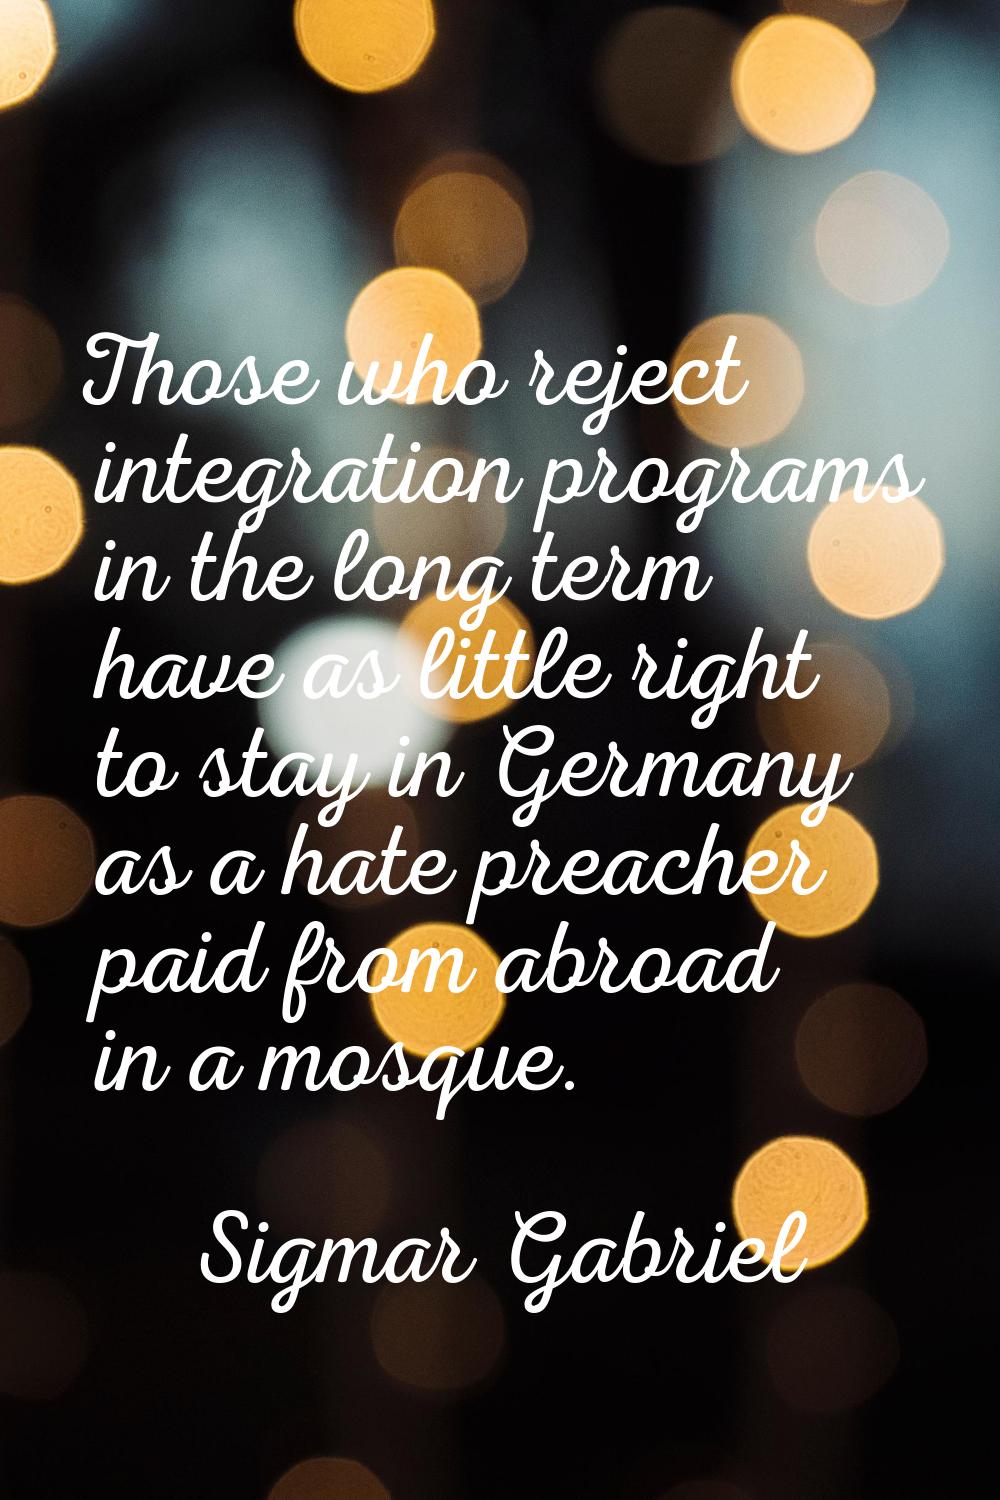 Those who reject integration programs in the long term have as little right to stay in Germany as a